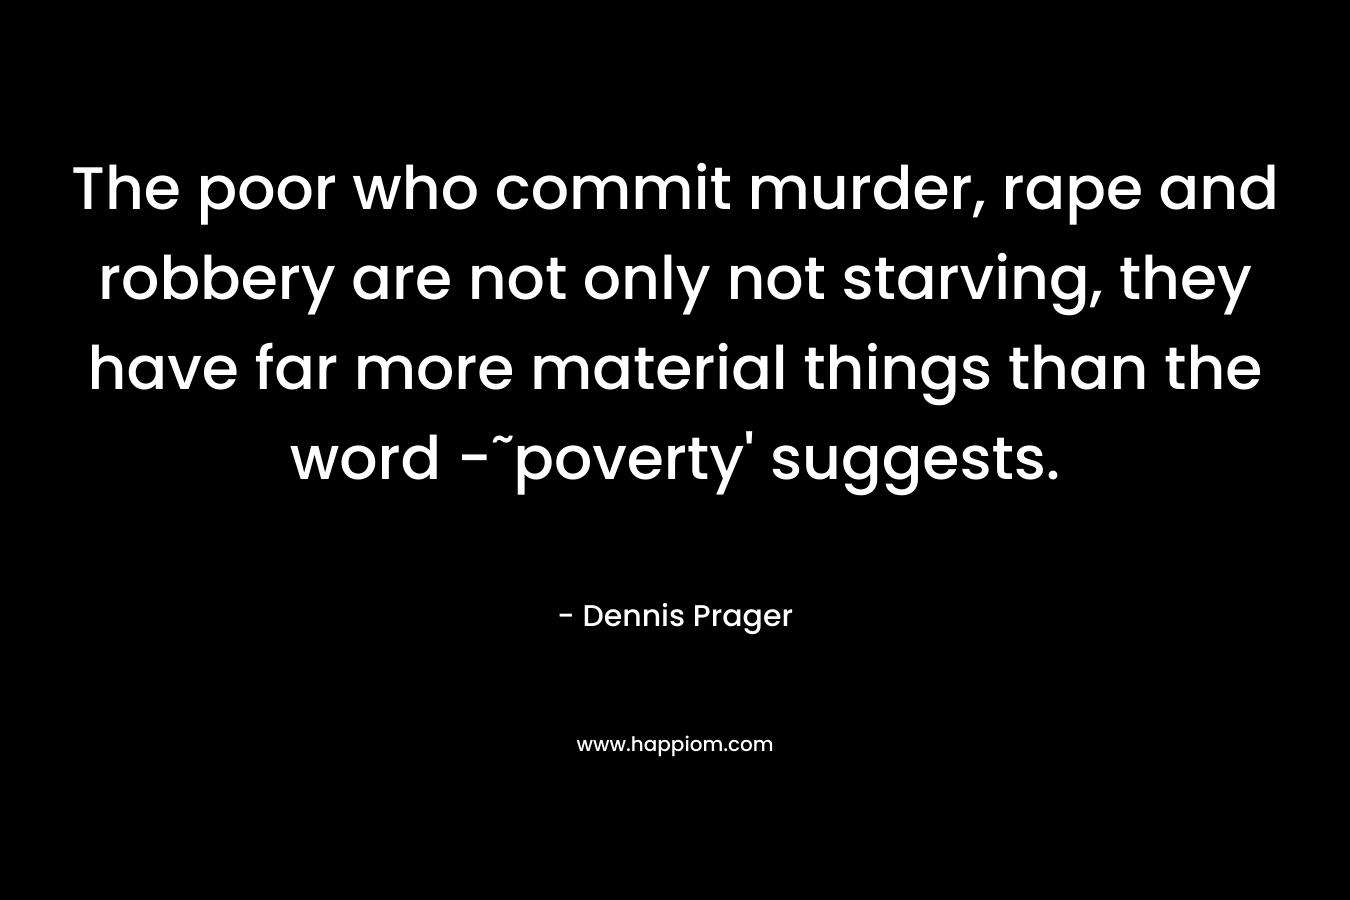 The poor who commit murder, rape and robbery are not only not starving, they have far more material things than the word -˜poverty' suggests.